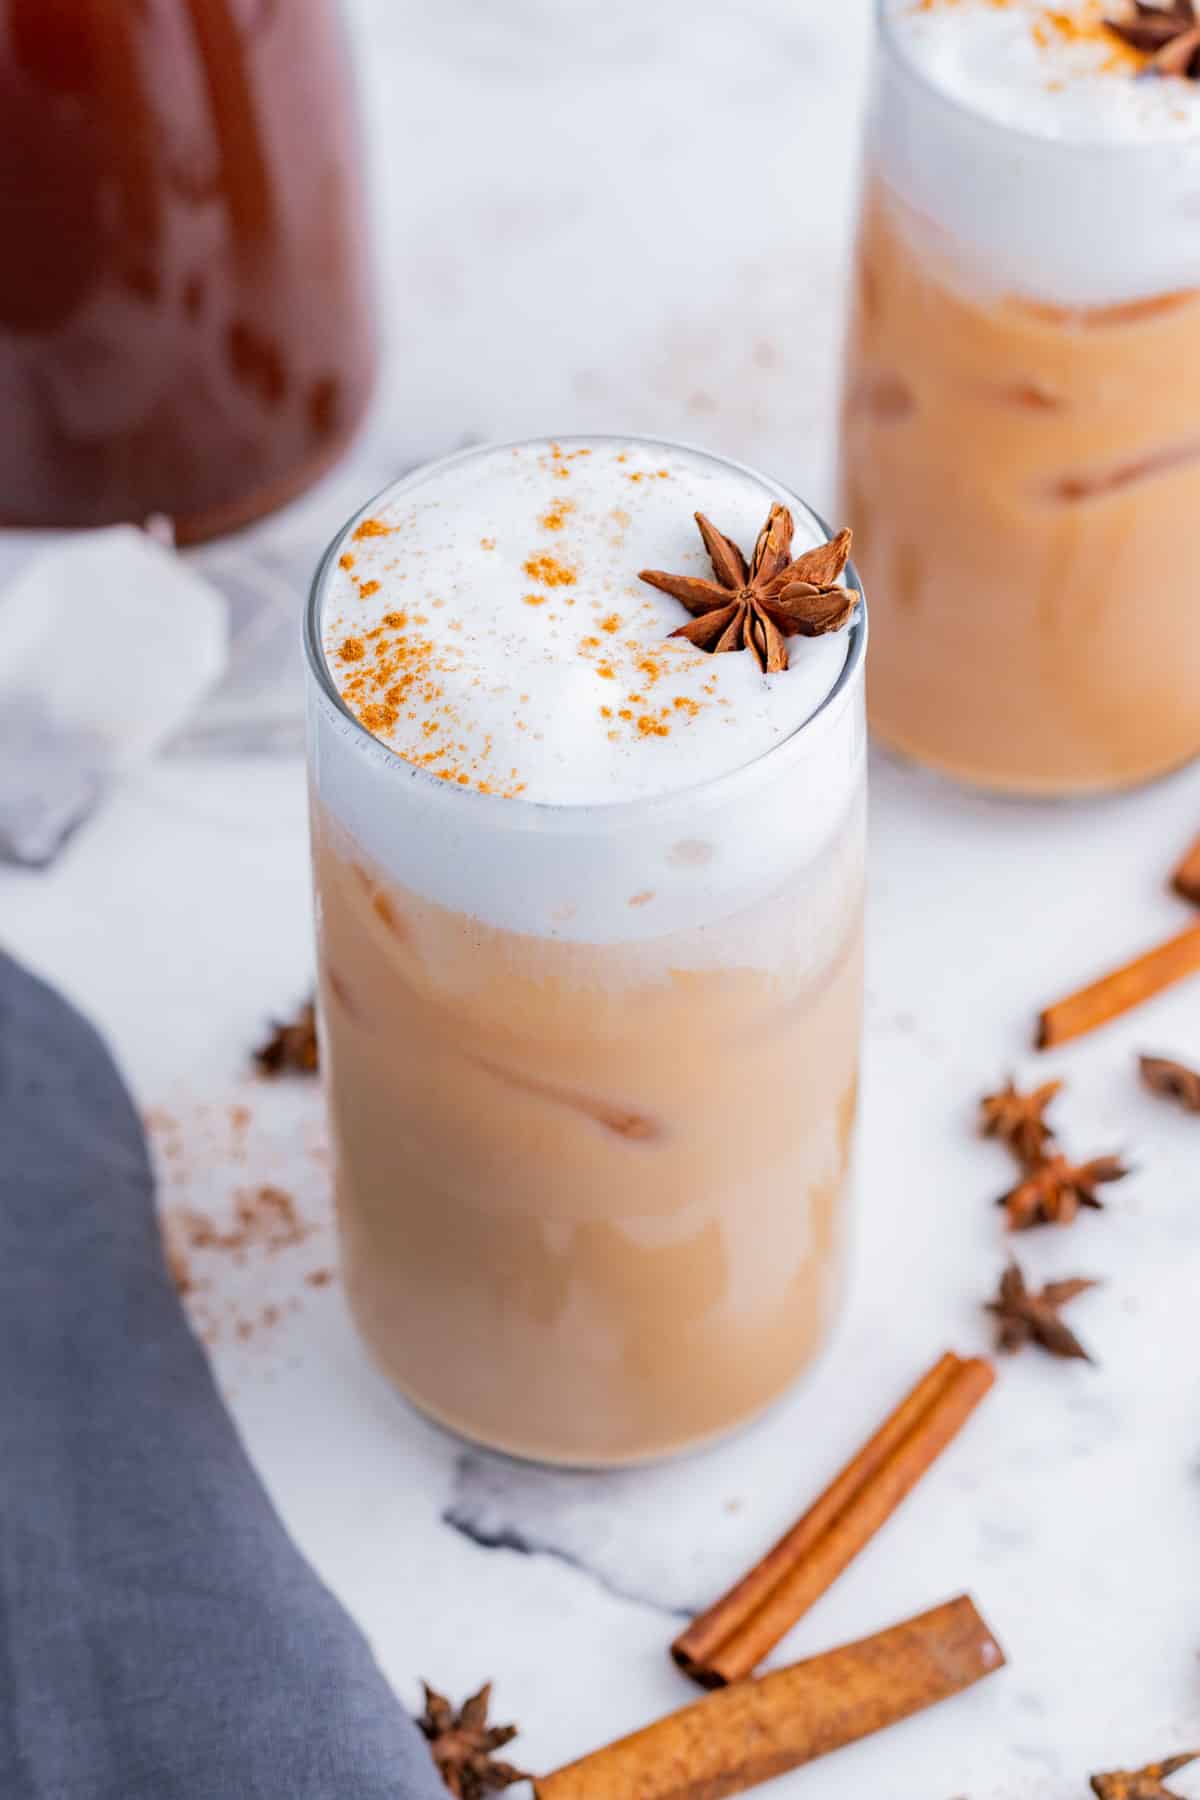 Warm spices, like cinnamon and star anise, top glasses of Iced Chai.